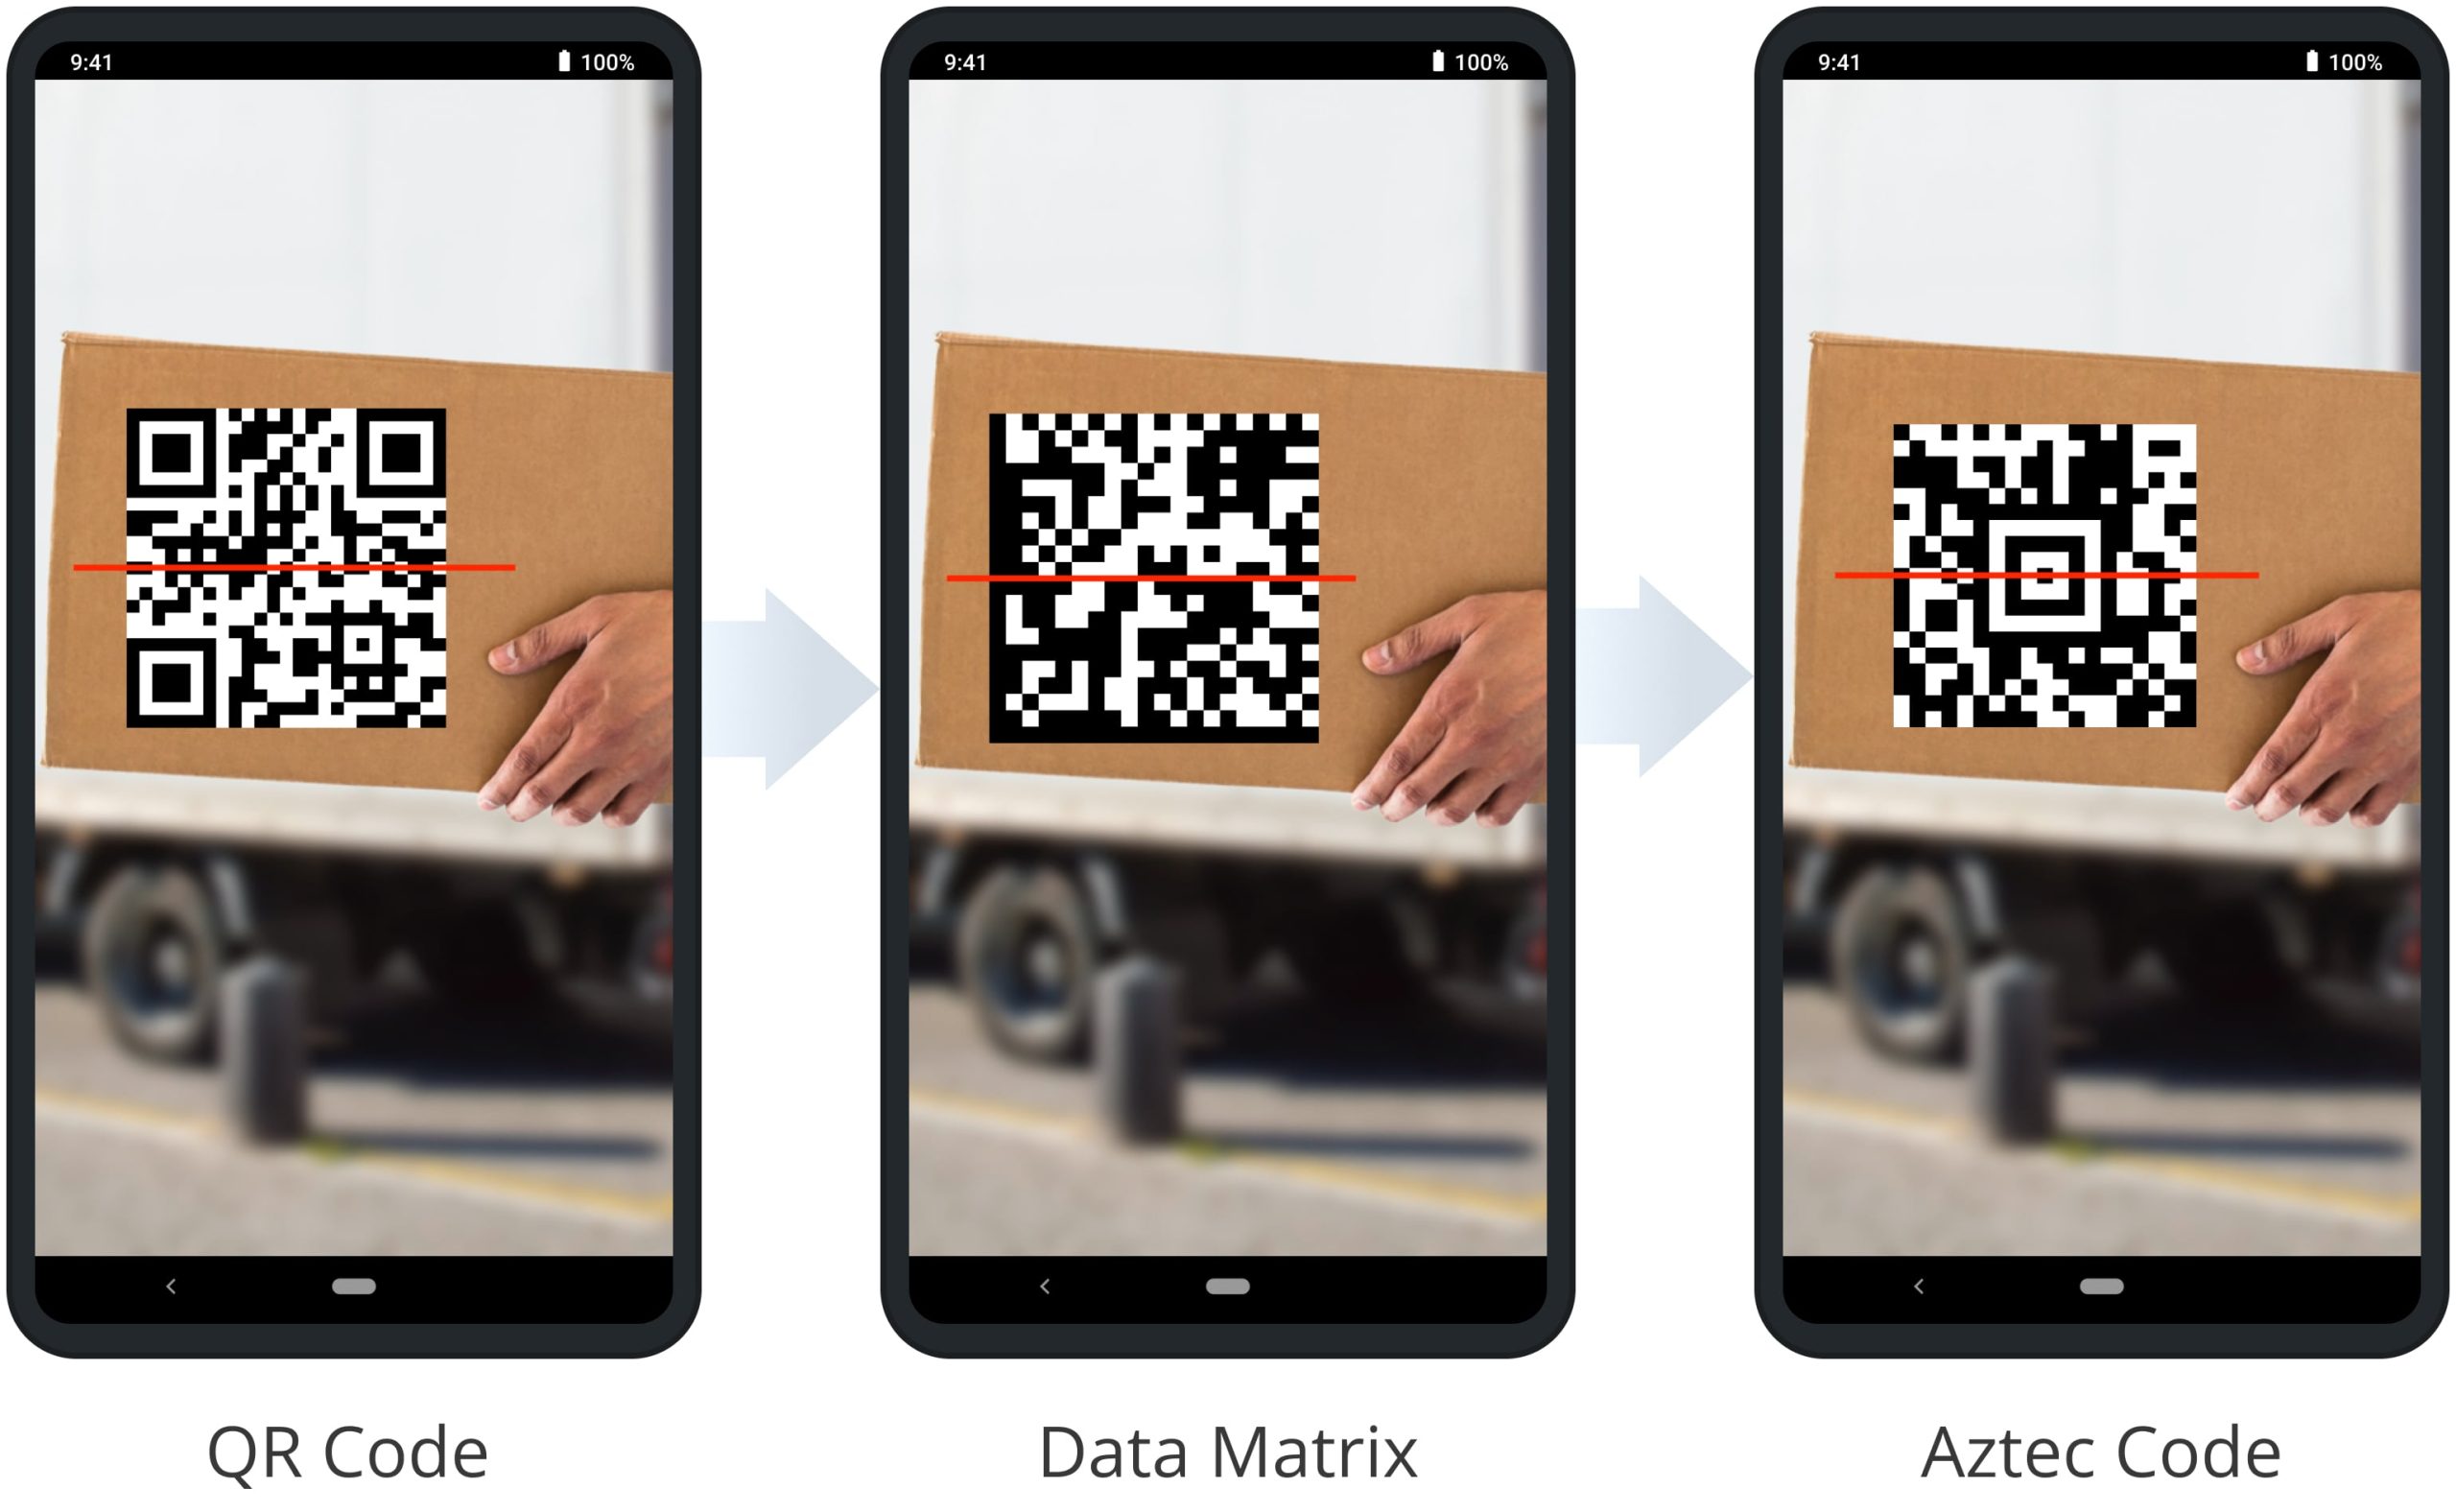 Scan QR Codes, Data Matrix, and Aztec Codes using Route4Me's Android Mobile Route Planner in-app barcode scanner.